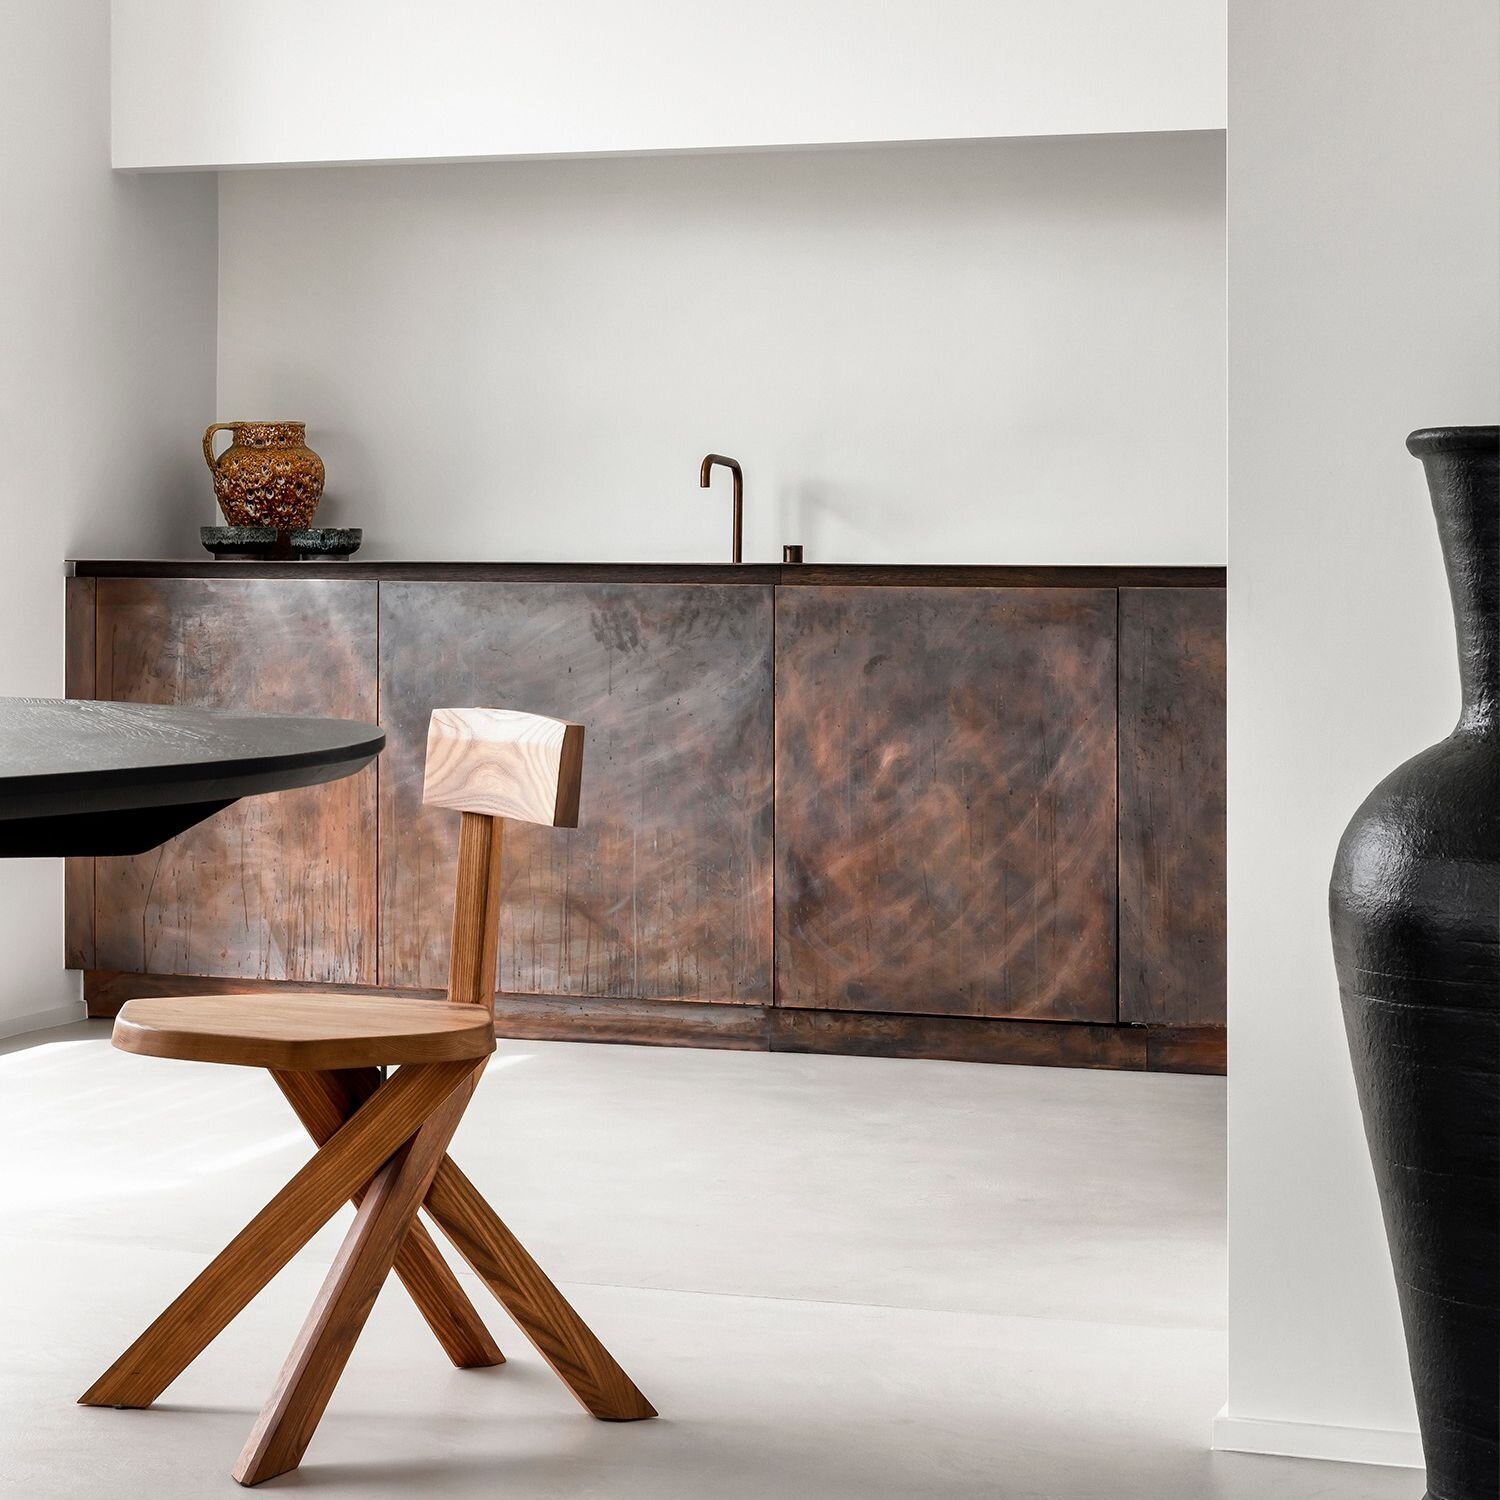 The rich amber and burnt orange tones created by these tumbled brass kitchen cabinets are just one of AE Studio&rsquo;s highlights from their inspiring Brussels project. 

#interiordesign #interiors #homeinspo #kitchendesign #luxurymaterials #interio